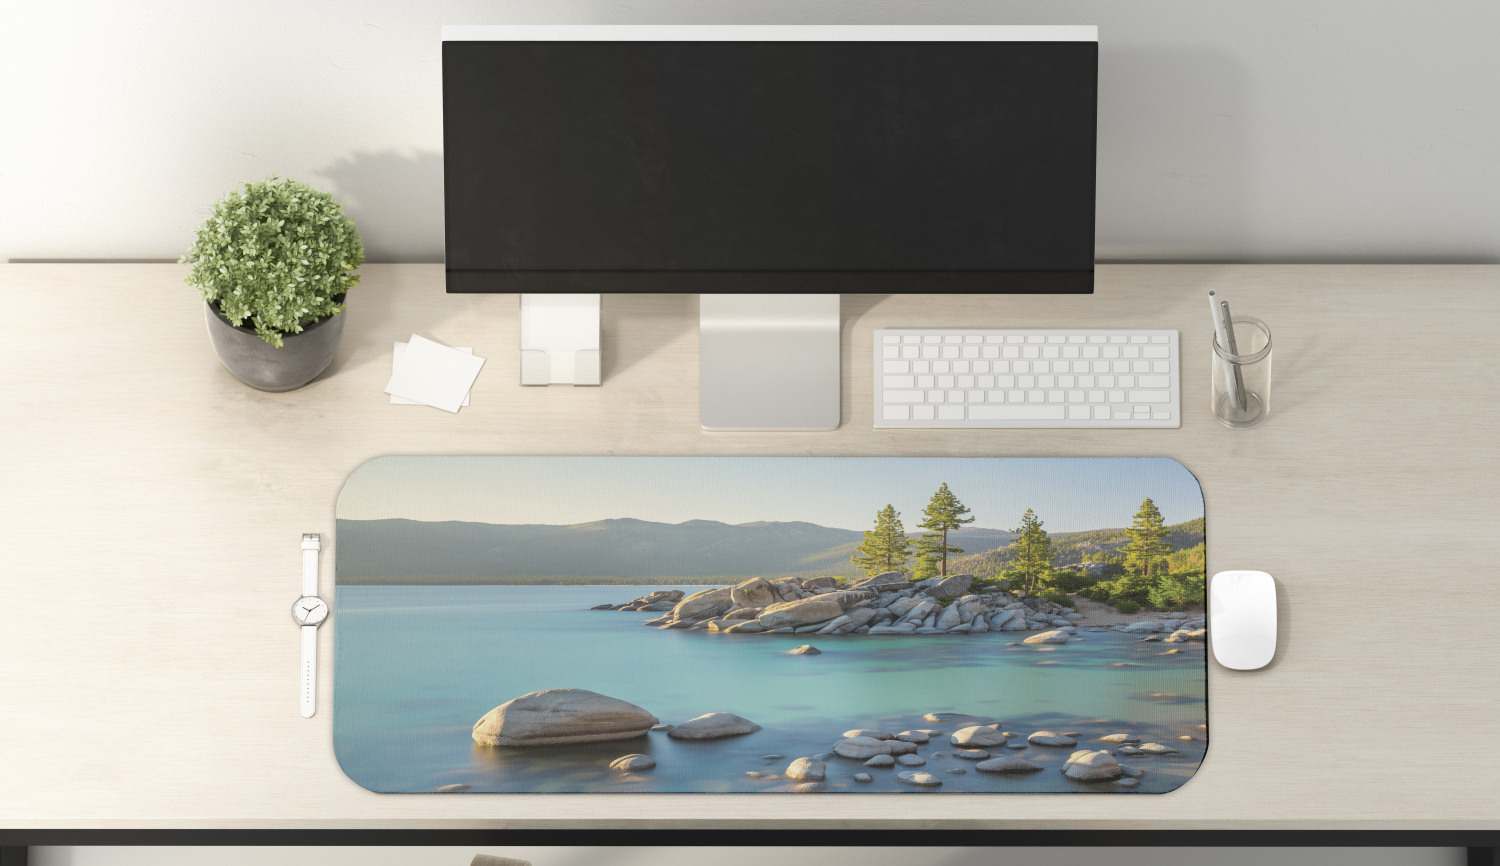 Lake Computer Mouse Pad, Pastoral Spring Time Scenery in Provincial Countryside Lake Beach Shallow Water Theme, Rectangle Non-Slip Rubber Mousepad Large, 31" x 12", Blue Grey, by Ambesonne - image 2 of 2